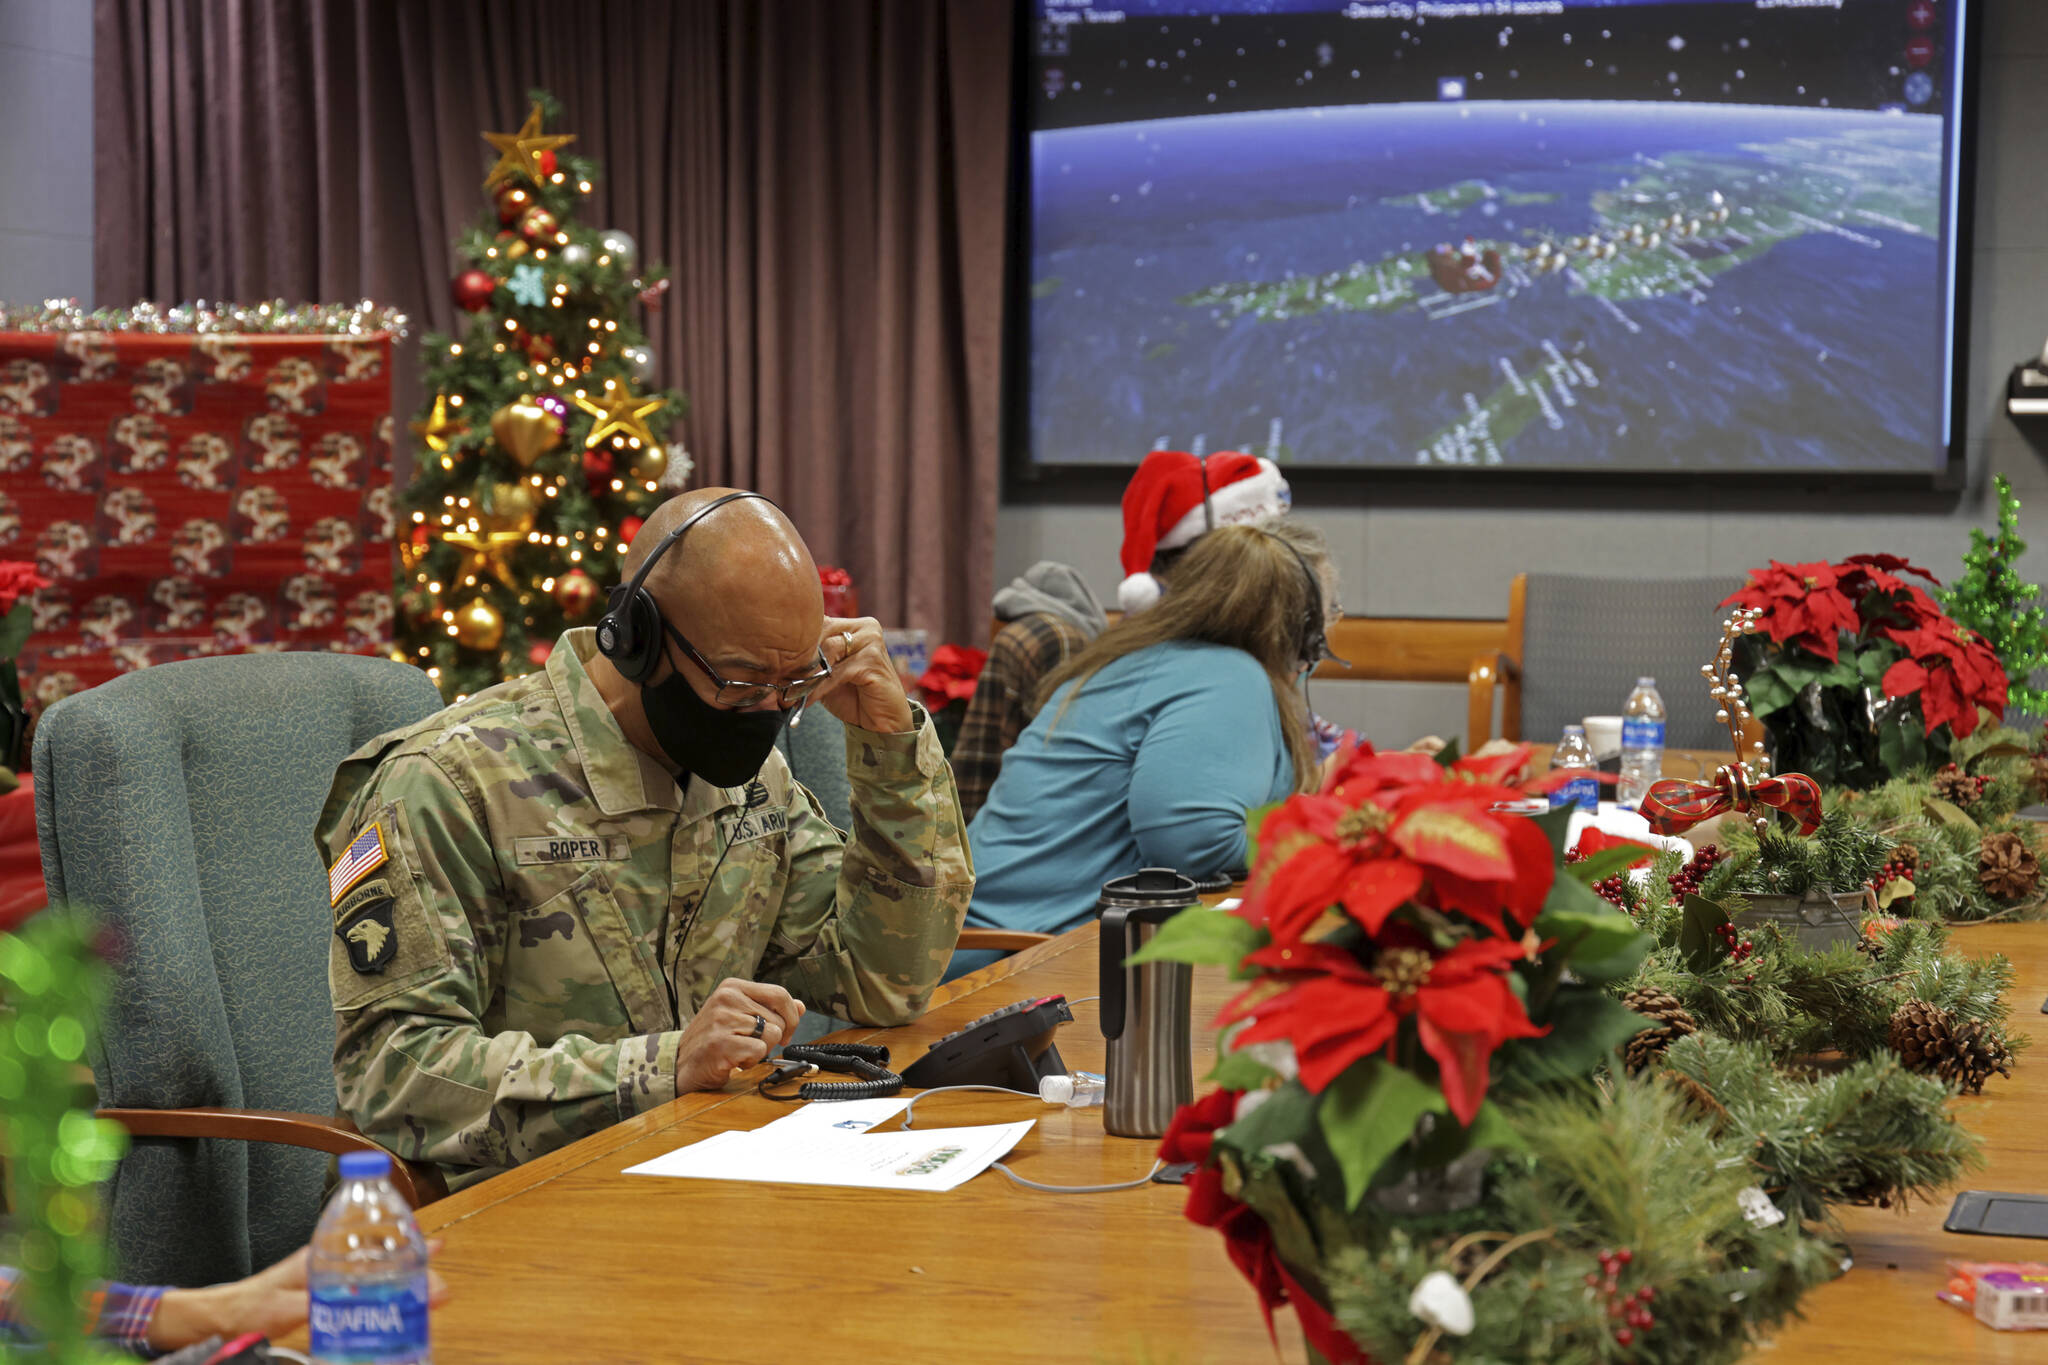 In this photo released by the U.S. Department of Defense, volunteers answer phones and emails from children around the globe during annual NORAD Tracks Santa event at Peterson Air Force Base in Colorado Springs, Colo., on Dec. 24, 2021. The U.S. military agency known for tracking Santa Claus as he delivers presents on Christmas Eve doesn’t expect COVID-19 or the “bomb cyclone” hitting North America to impact Saint Nick’s global travels this year. NORAD, the North American Aerospace Defense Command, is responsible for monitoring and defending the skies above North America. (Jhomil Bansil / U.S. Department of Defense)